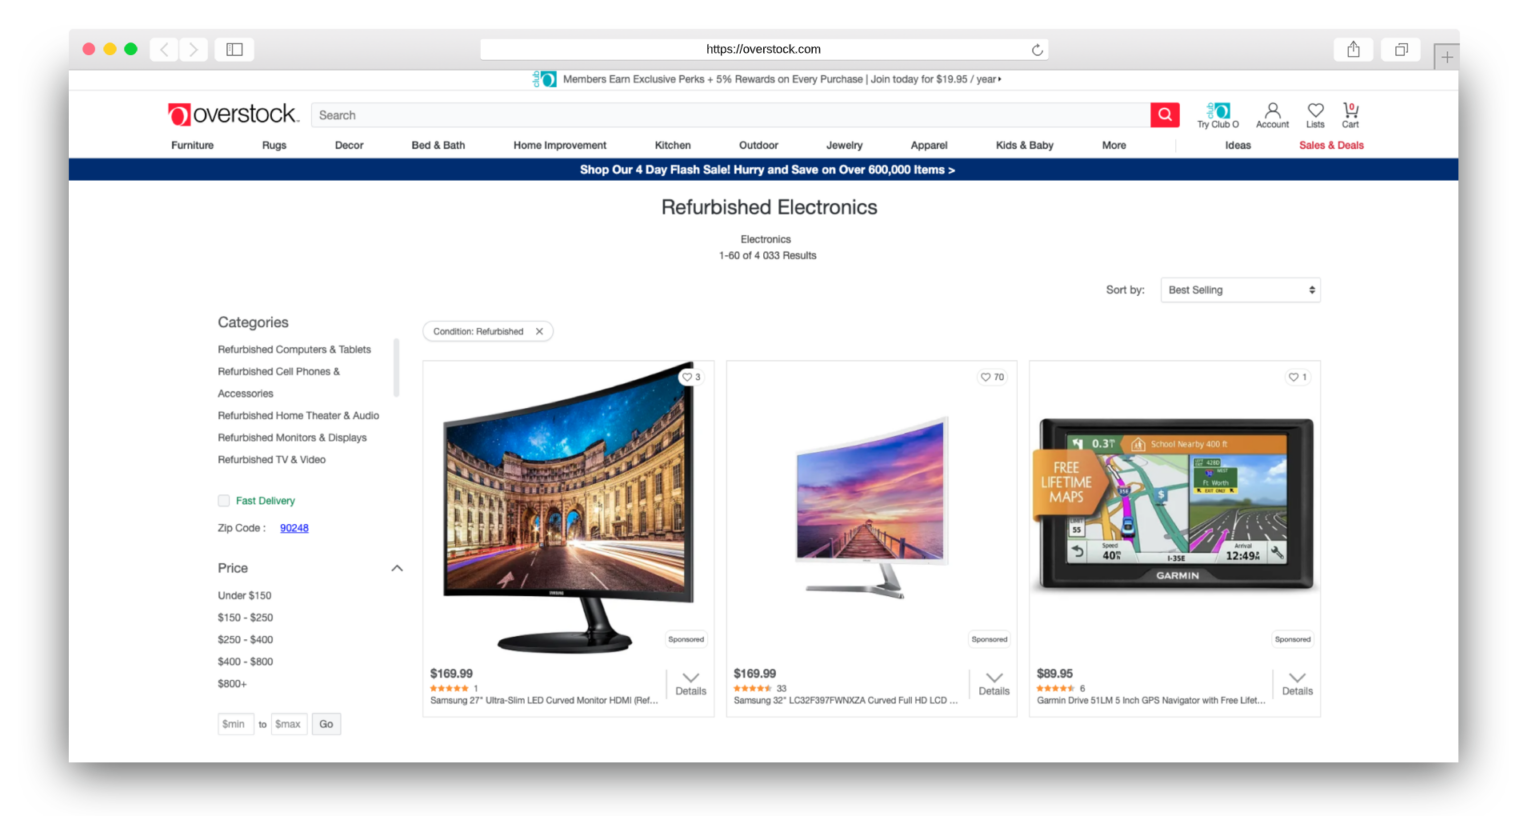 The Best Websites For Buying Refurbished Electronics [2020]